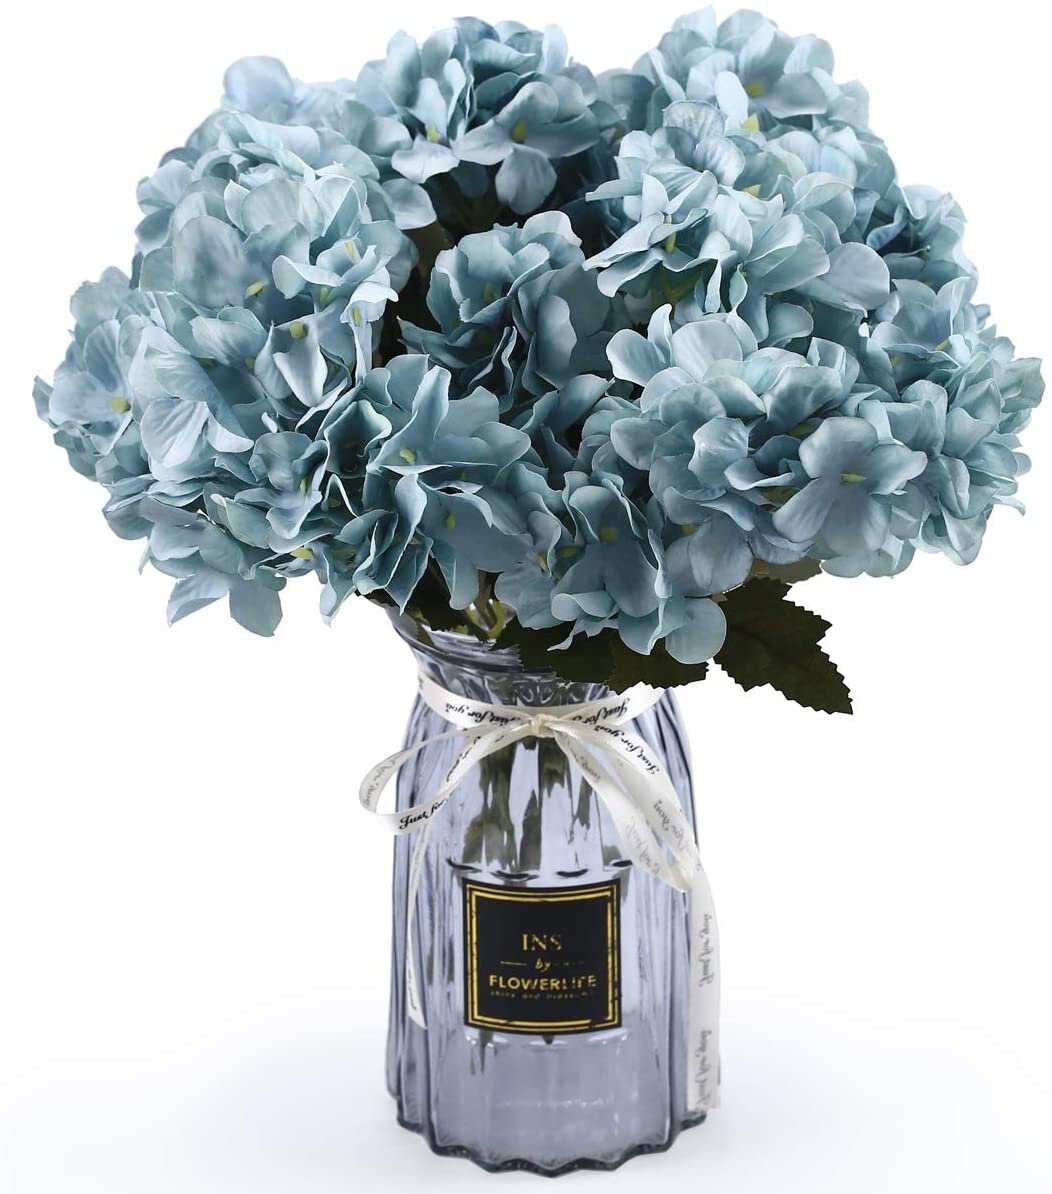 4 Packs White Silk Hydrangea Flowers With Vase DIY Artificial Hydrangea Flowers Bouquets Arrangement Centerpiece For Weddings, Baby Showers, Birthday Parties, Home Office Decor - Image 0